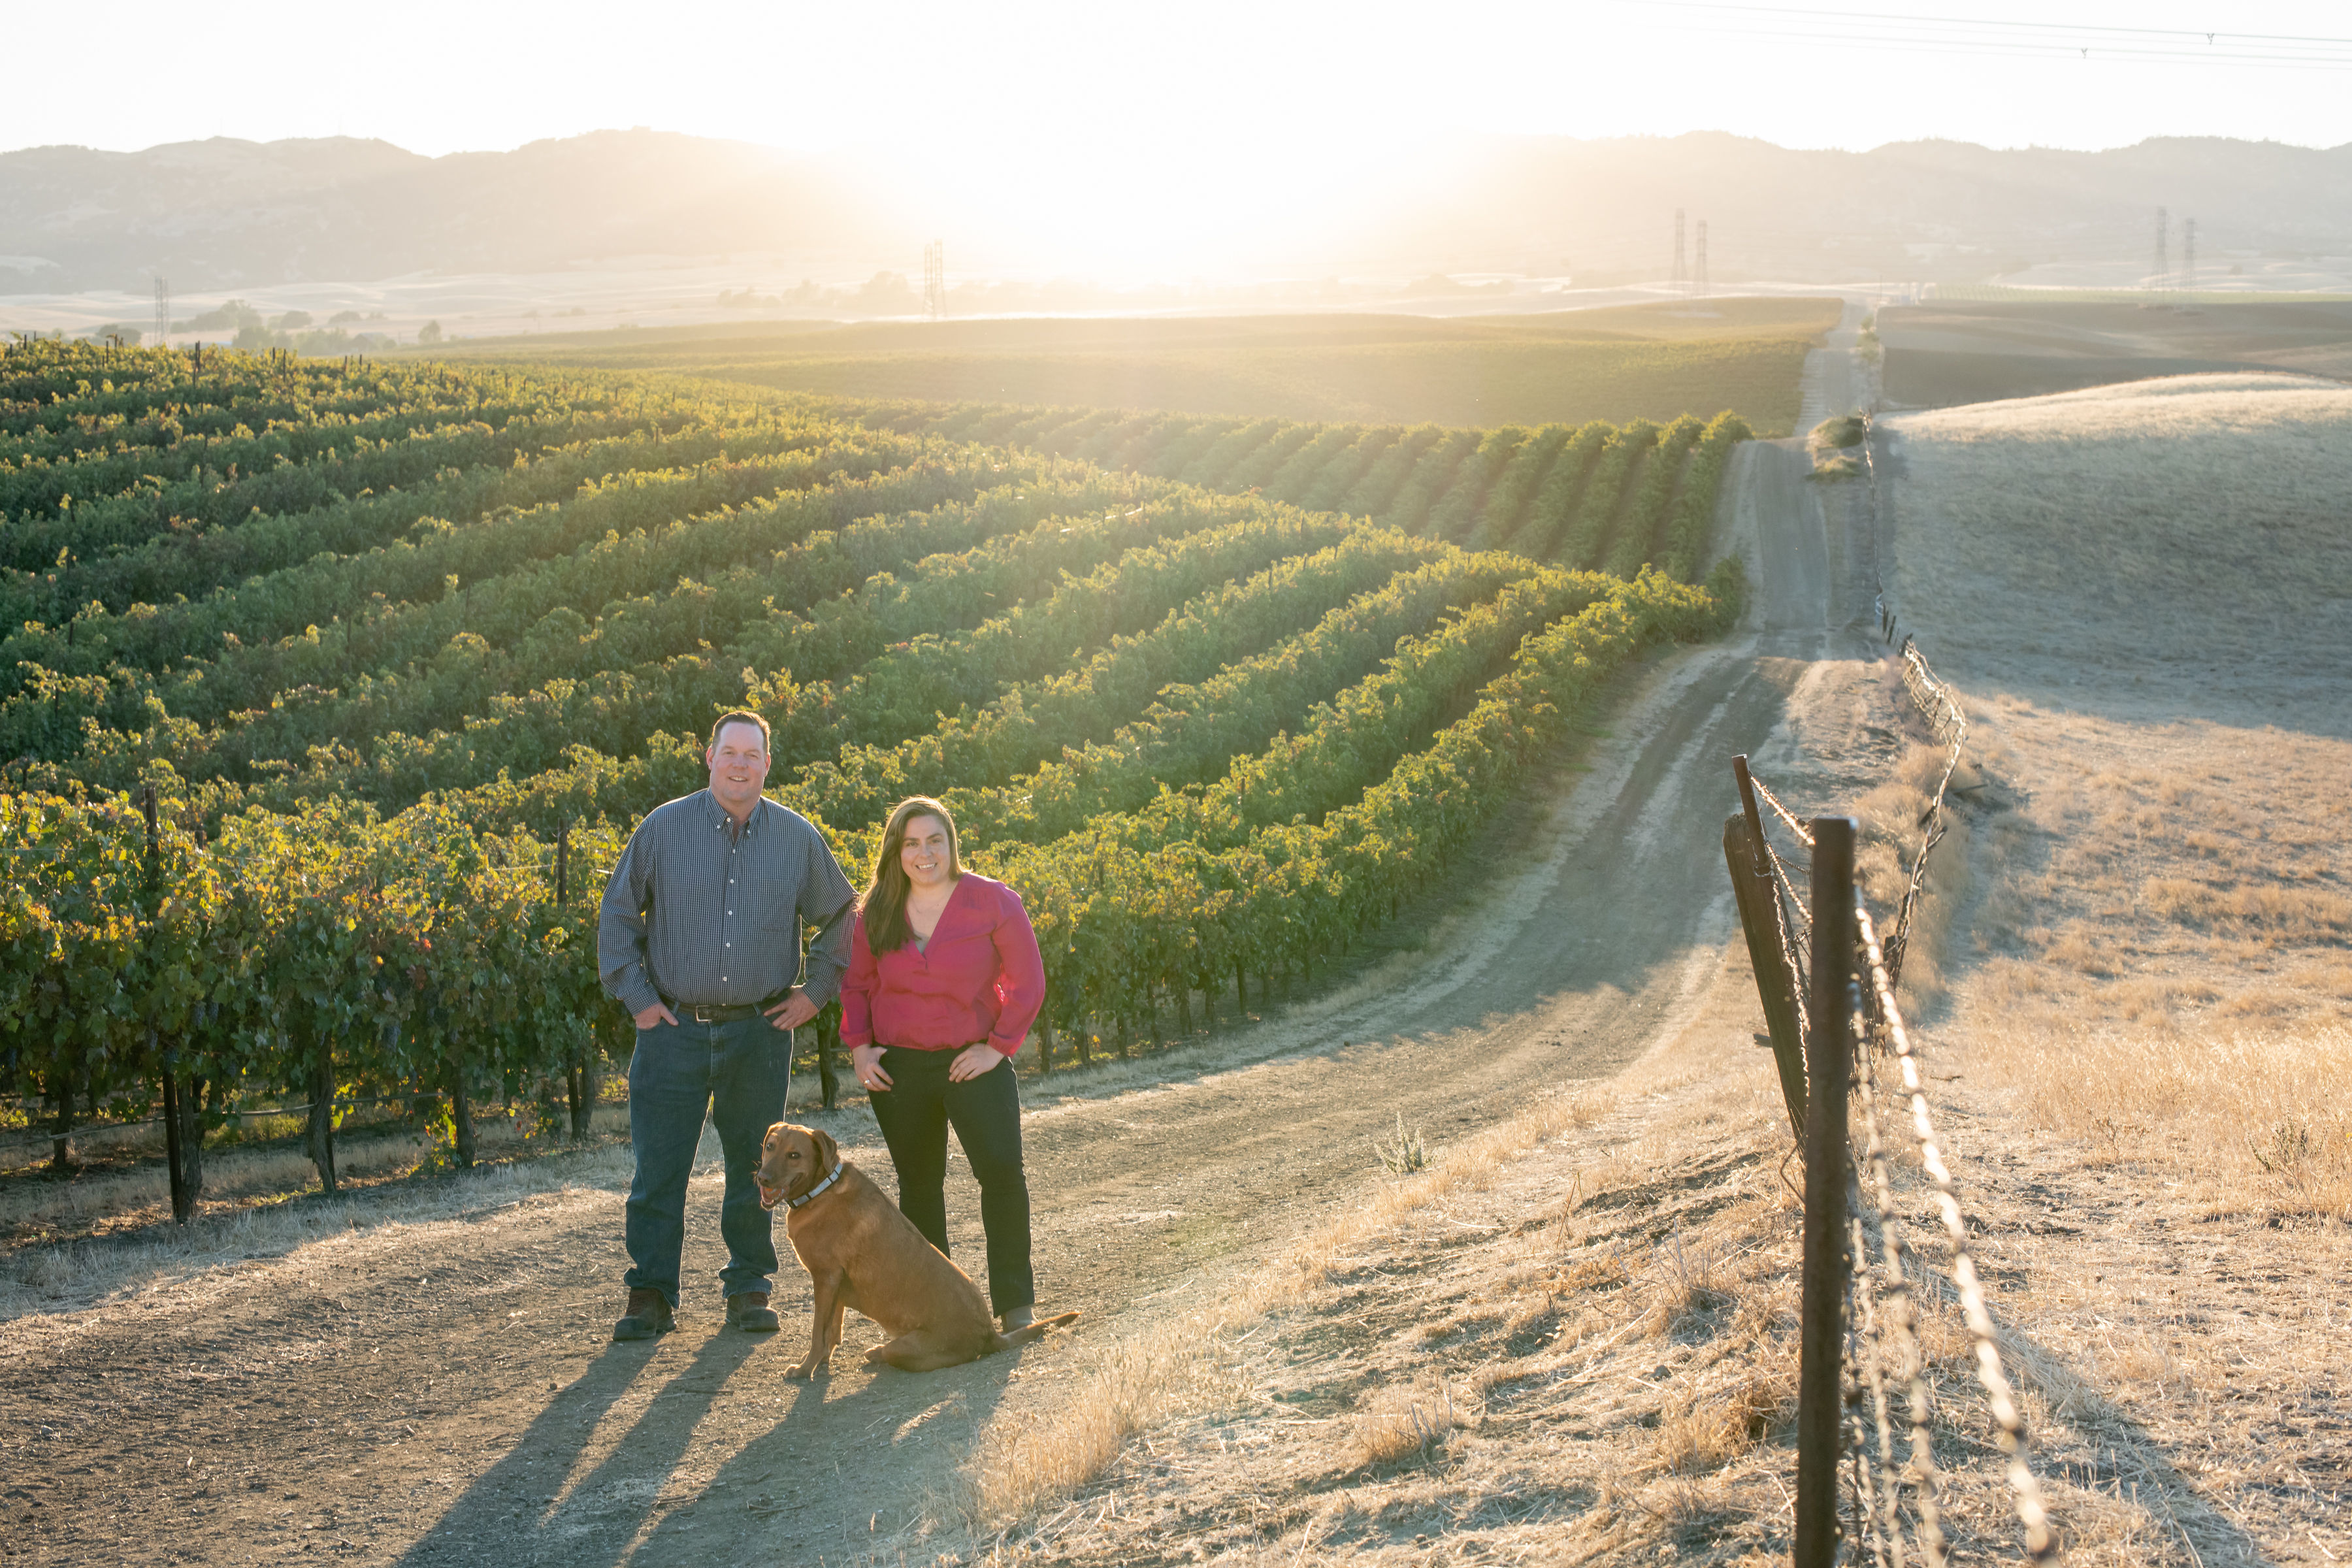 Carrying forth an enterprising spirit that dates back four generations, the new wines from the iconic C. Mondavi family are of distinct quality, yet are also approachable for everyday pairings.